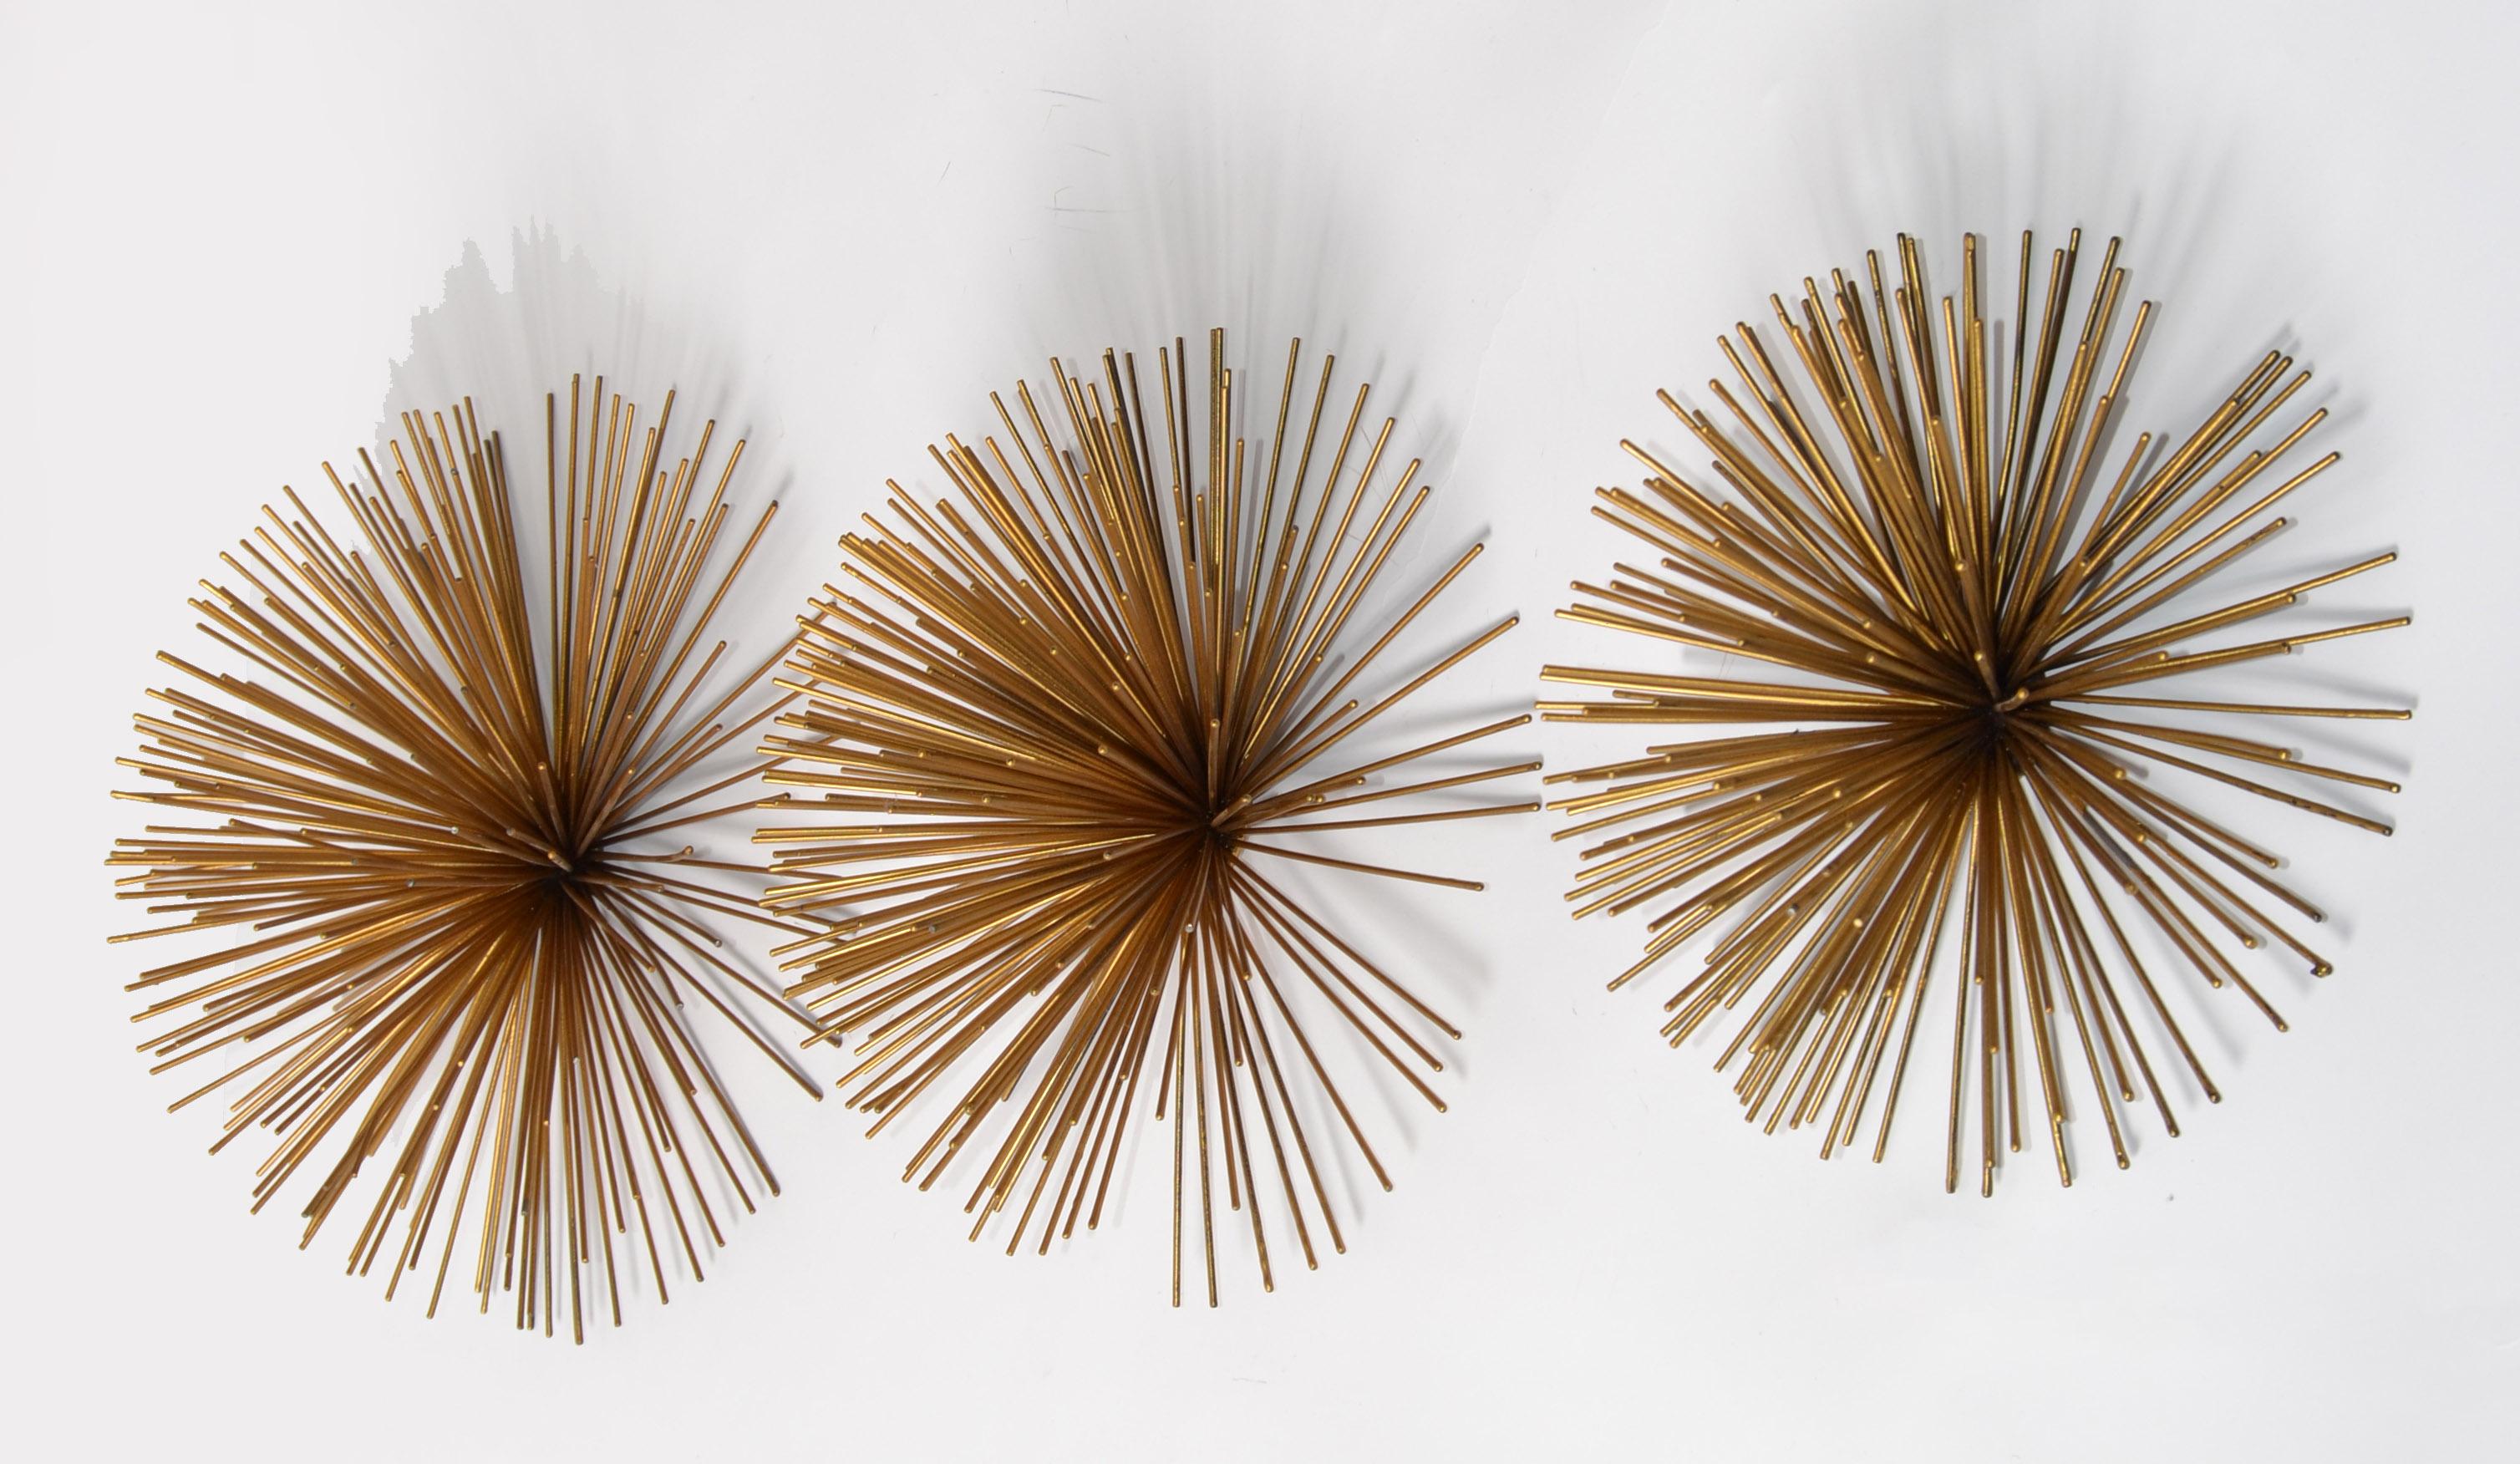 Mid-Century Modern funky 3 Pieces Steel Pom Pom Wall Art in Brass Finish and black painted Wall Sculpture in the Style of Curtis Jeré.
American Metal Art with a touch of Designer Harry Bertoia, combines the kinetic movement of the sounding